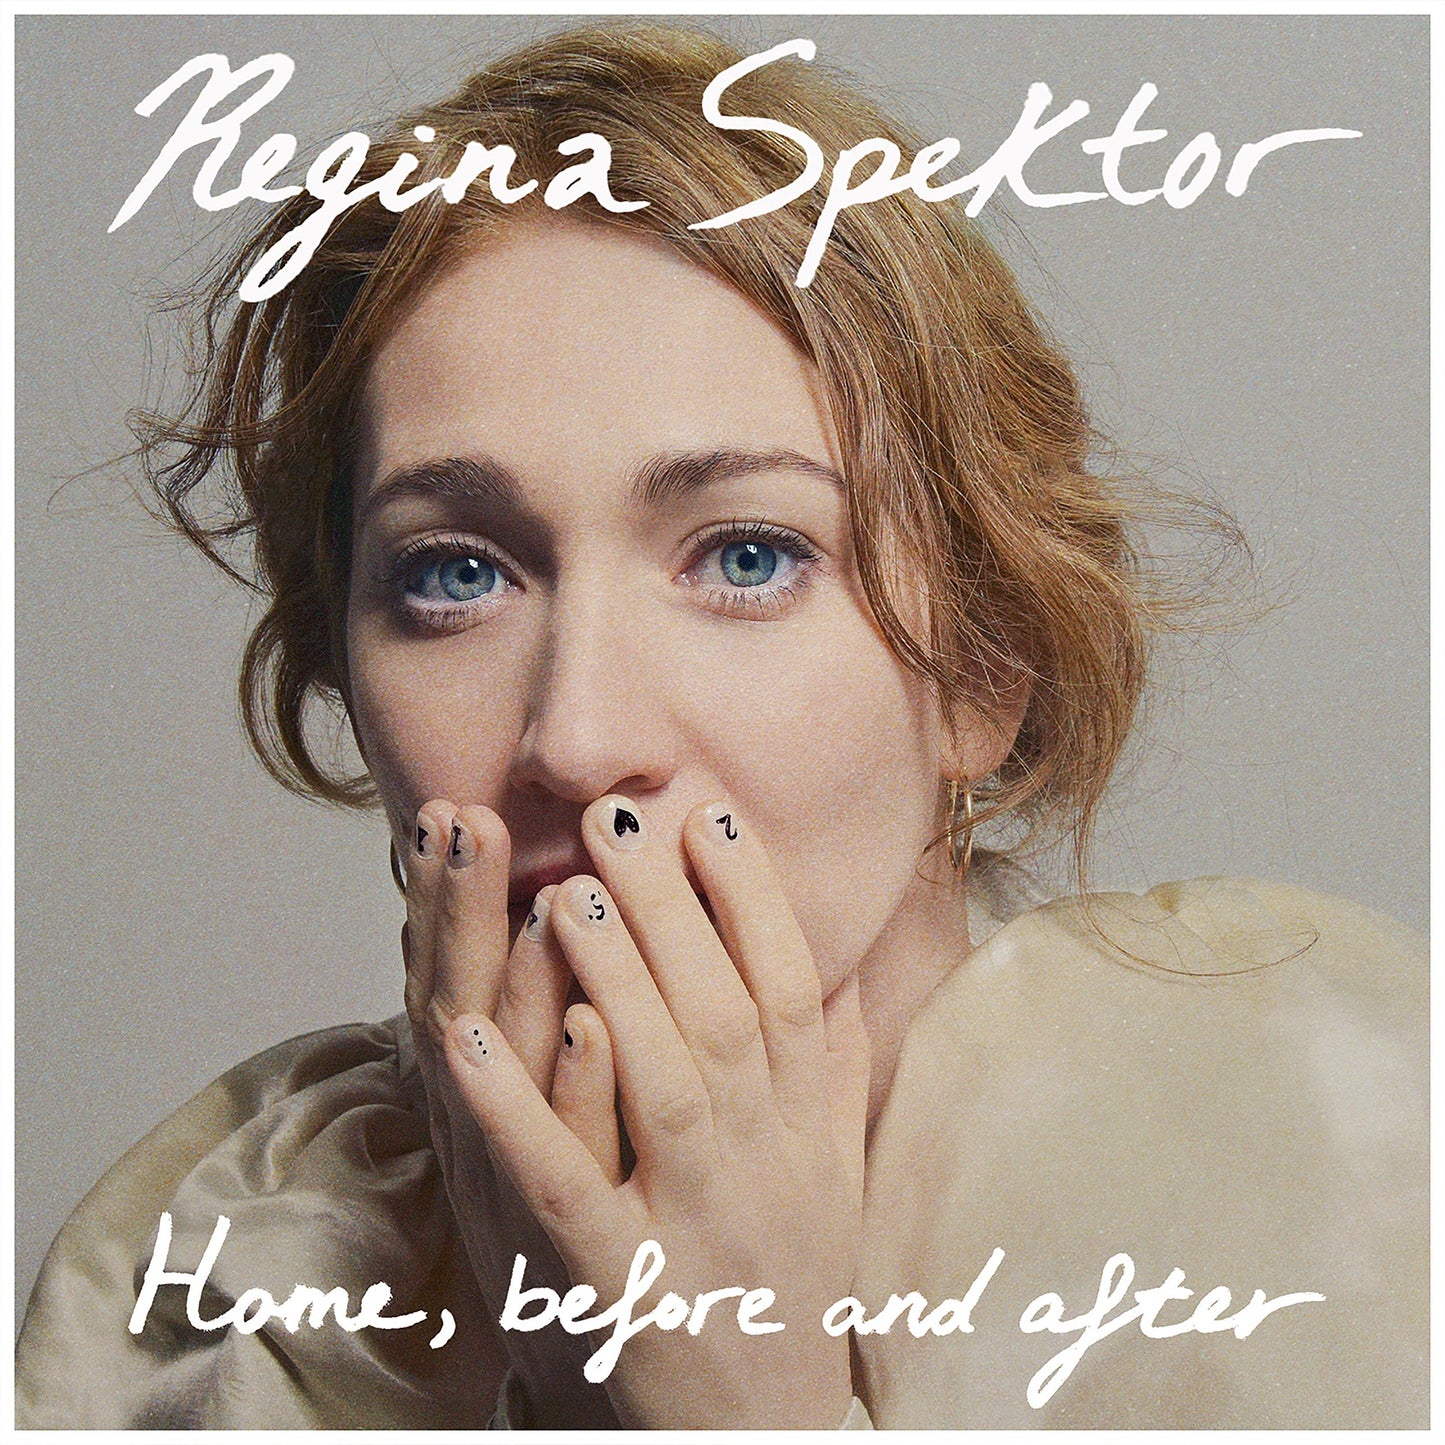 Regina Spektor "Home, before and after" LP